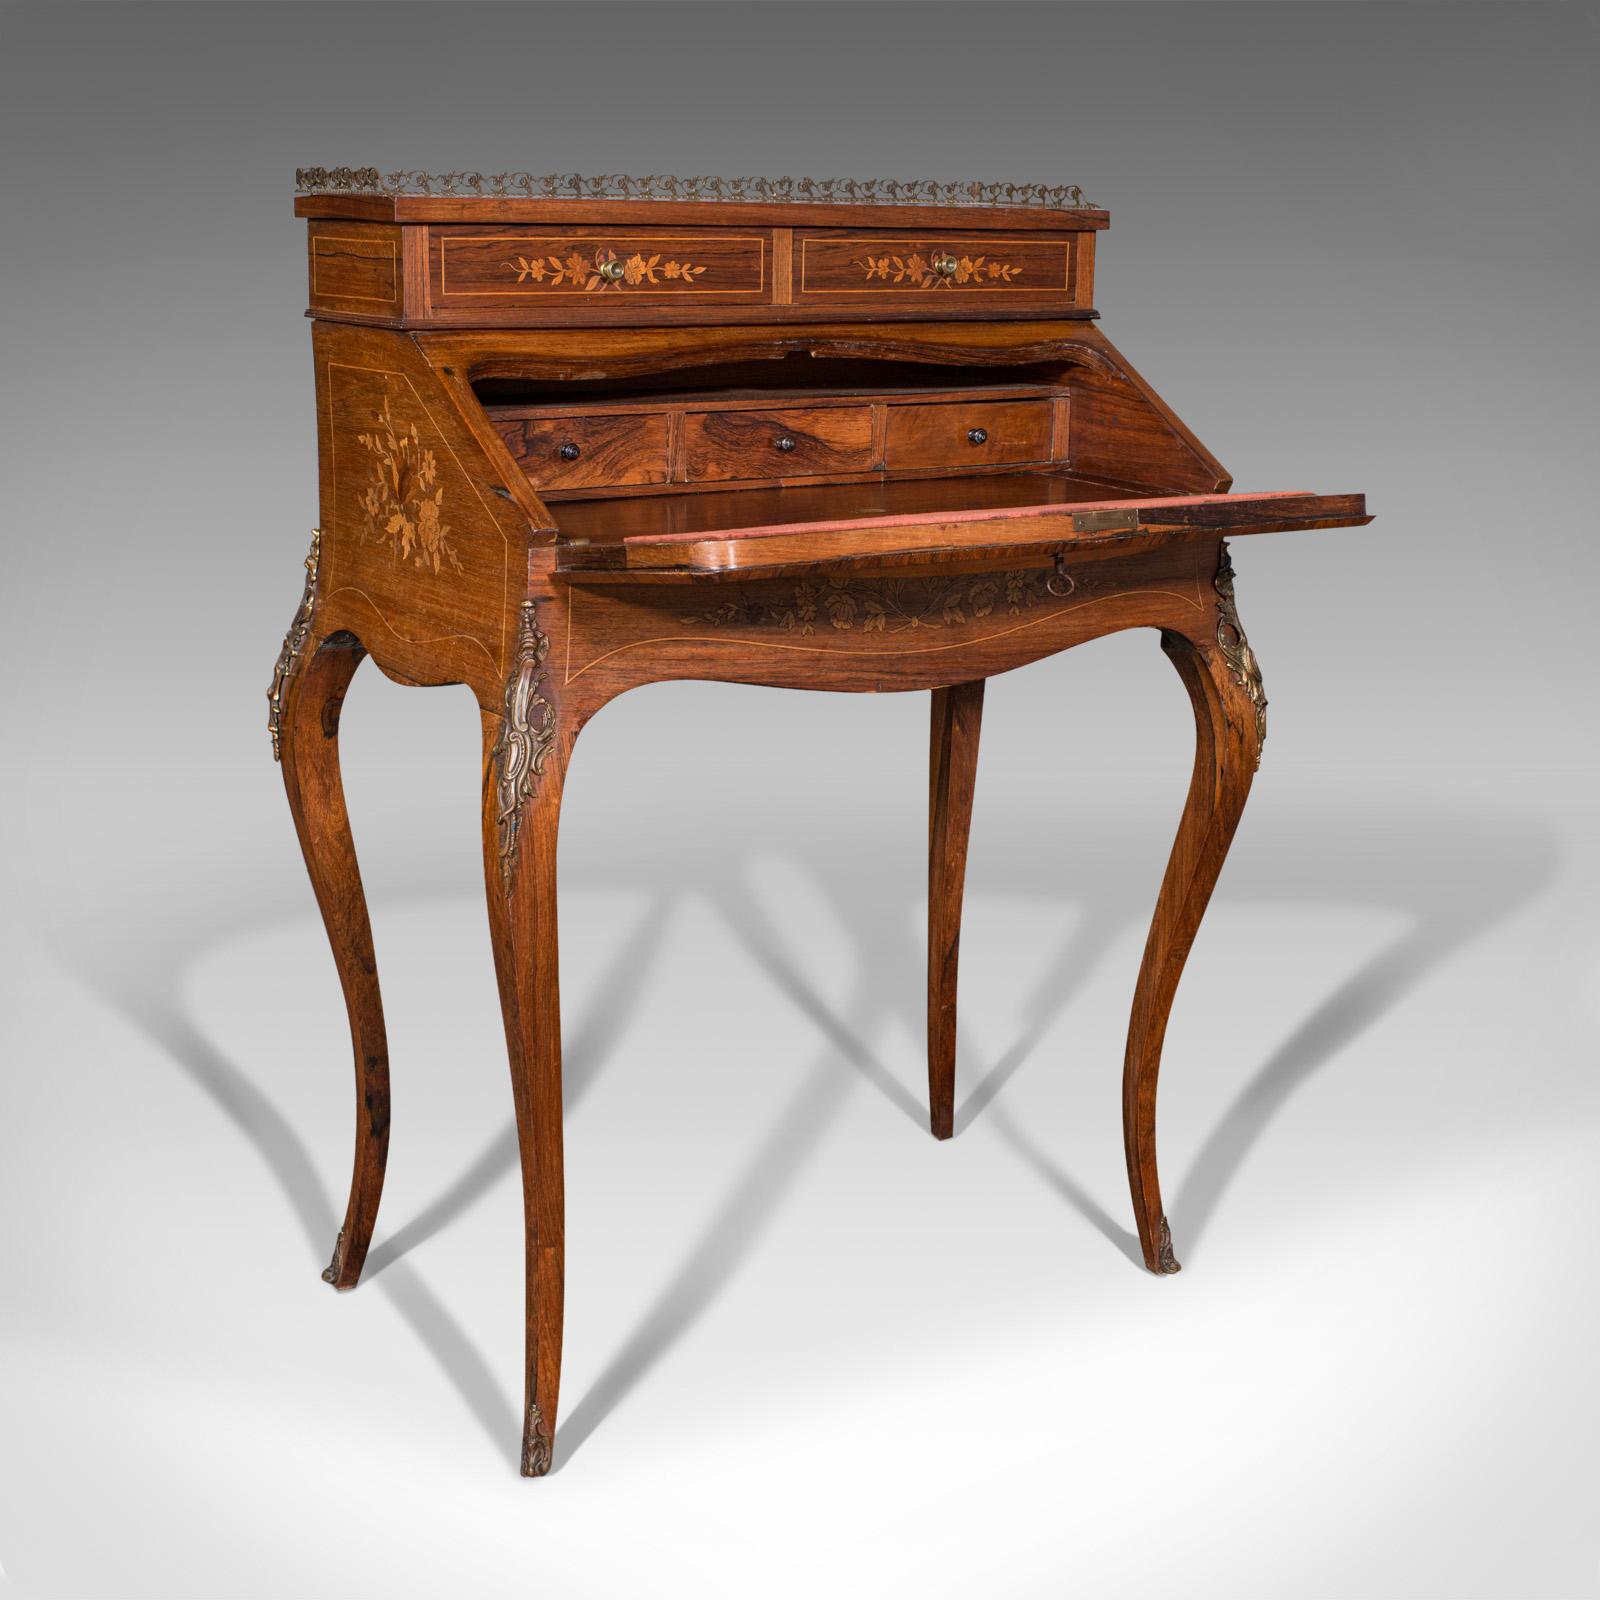 This is an antique bureau de dame. A French, walnut compact writing desk, dating to the Victorian period, circa 1880.

Beautiful French presentation and craftsmanship
Displays a desirable aged patina and in good order
Select walnut presents fine